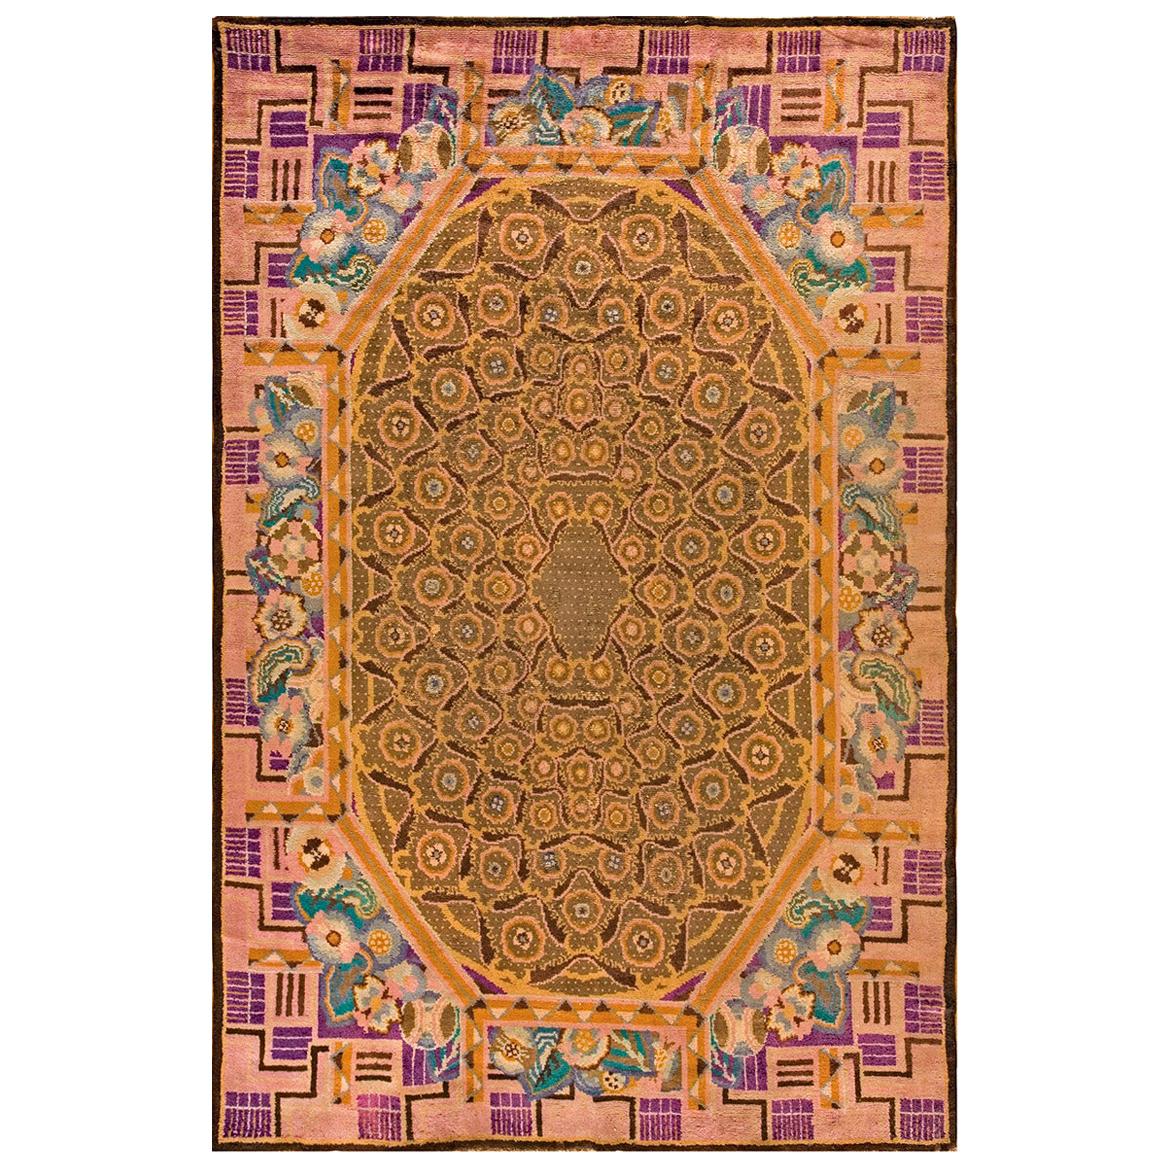 1920s French Art Deco Carpet ( 8'10" x 13'3' - 270 x 405 )  For Sale